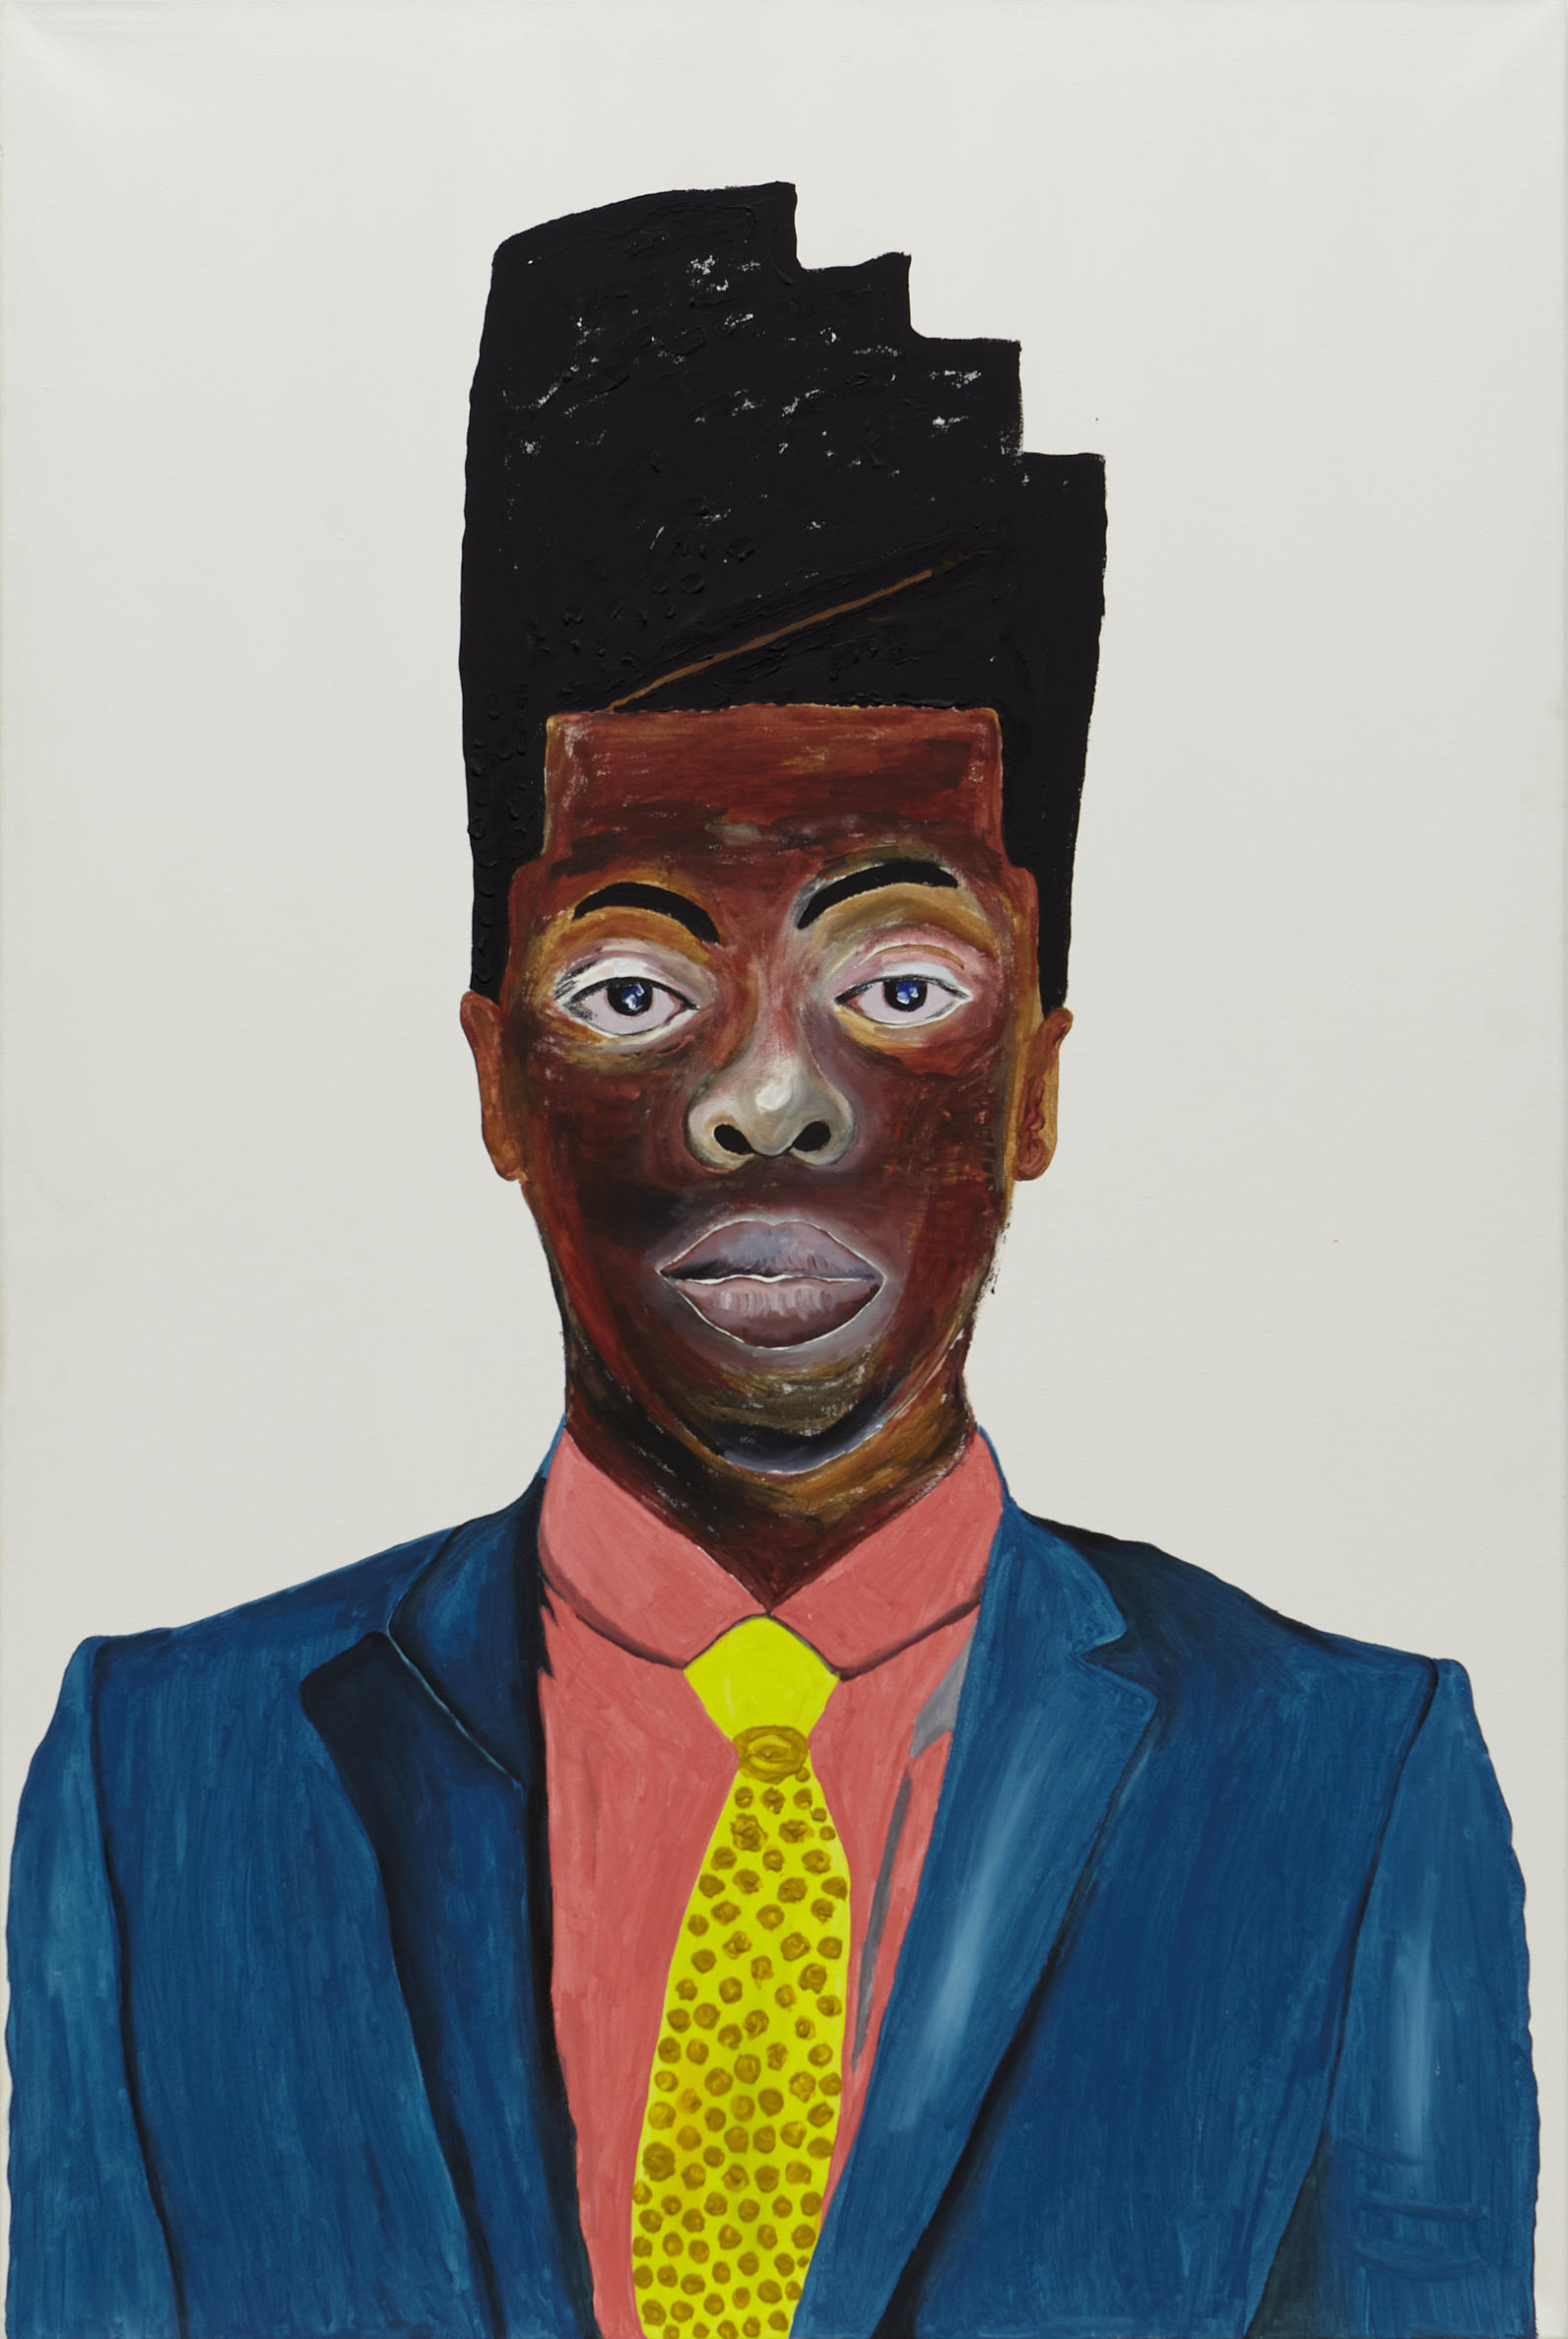 A painting of a person in a blue suit with a yellow tie and a pink shirt.